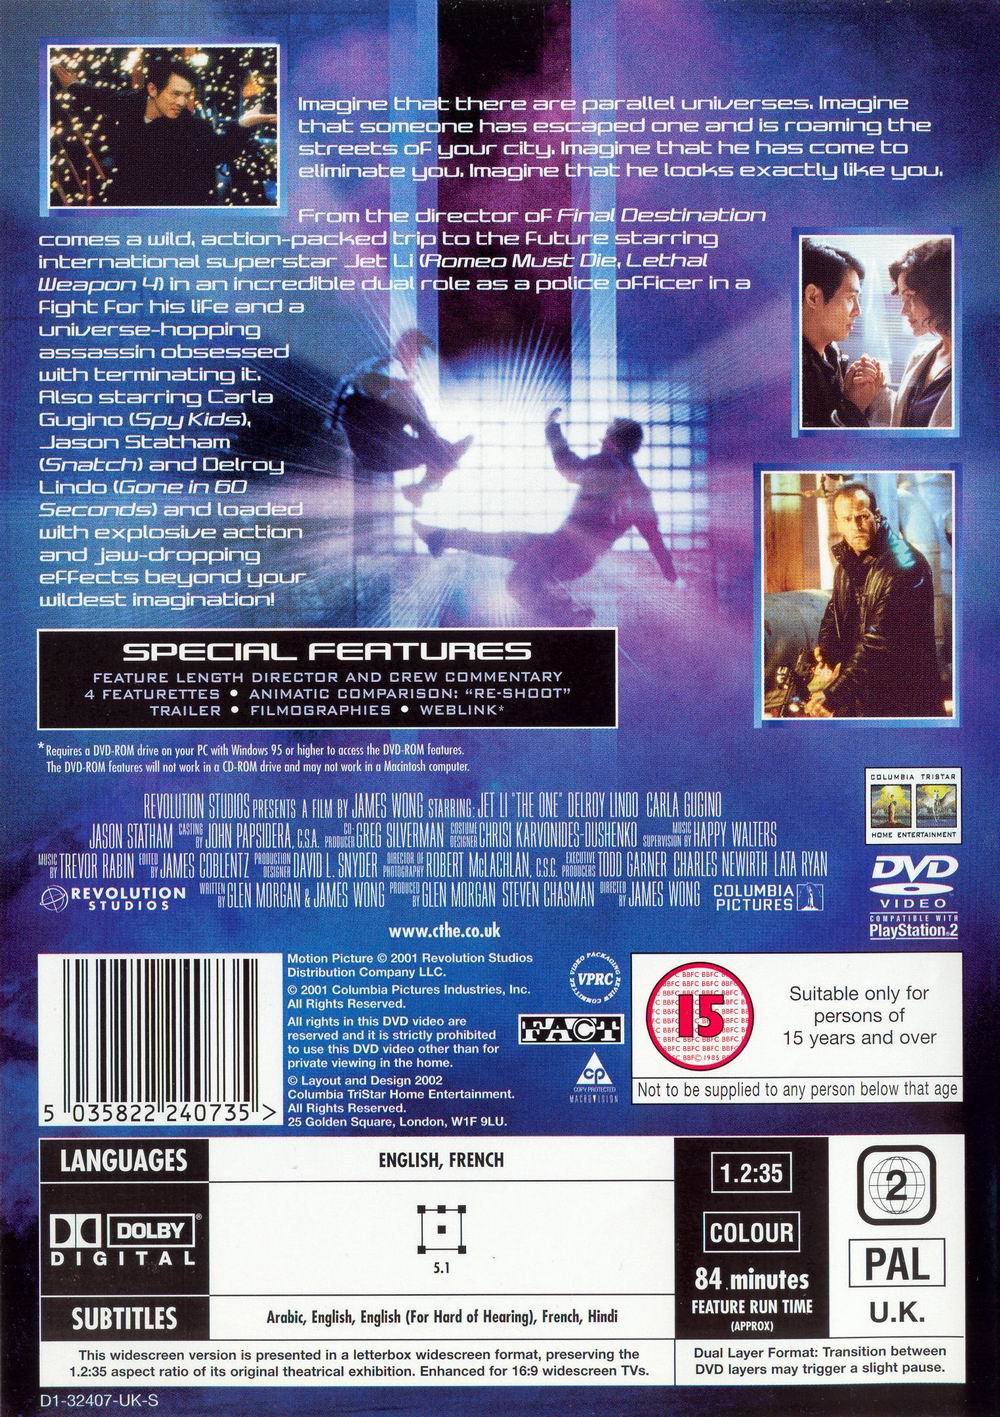 Movies on DVD and Blu-ray: The One (2001)